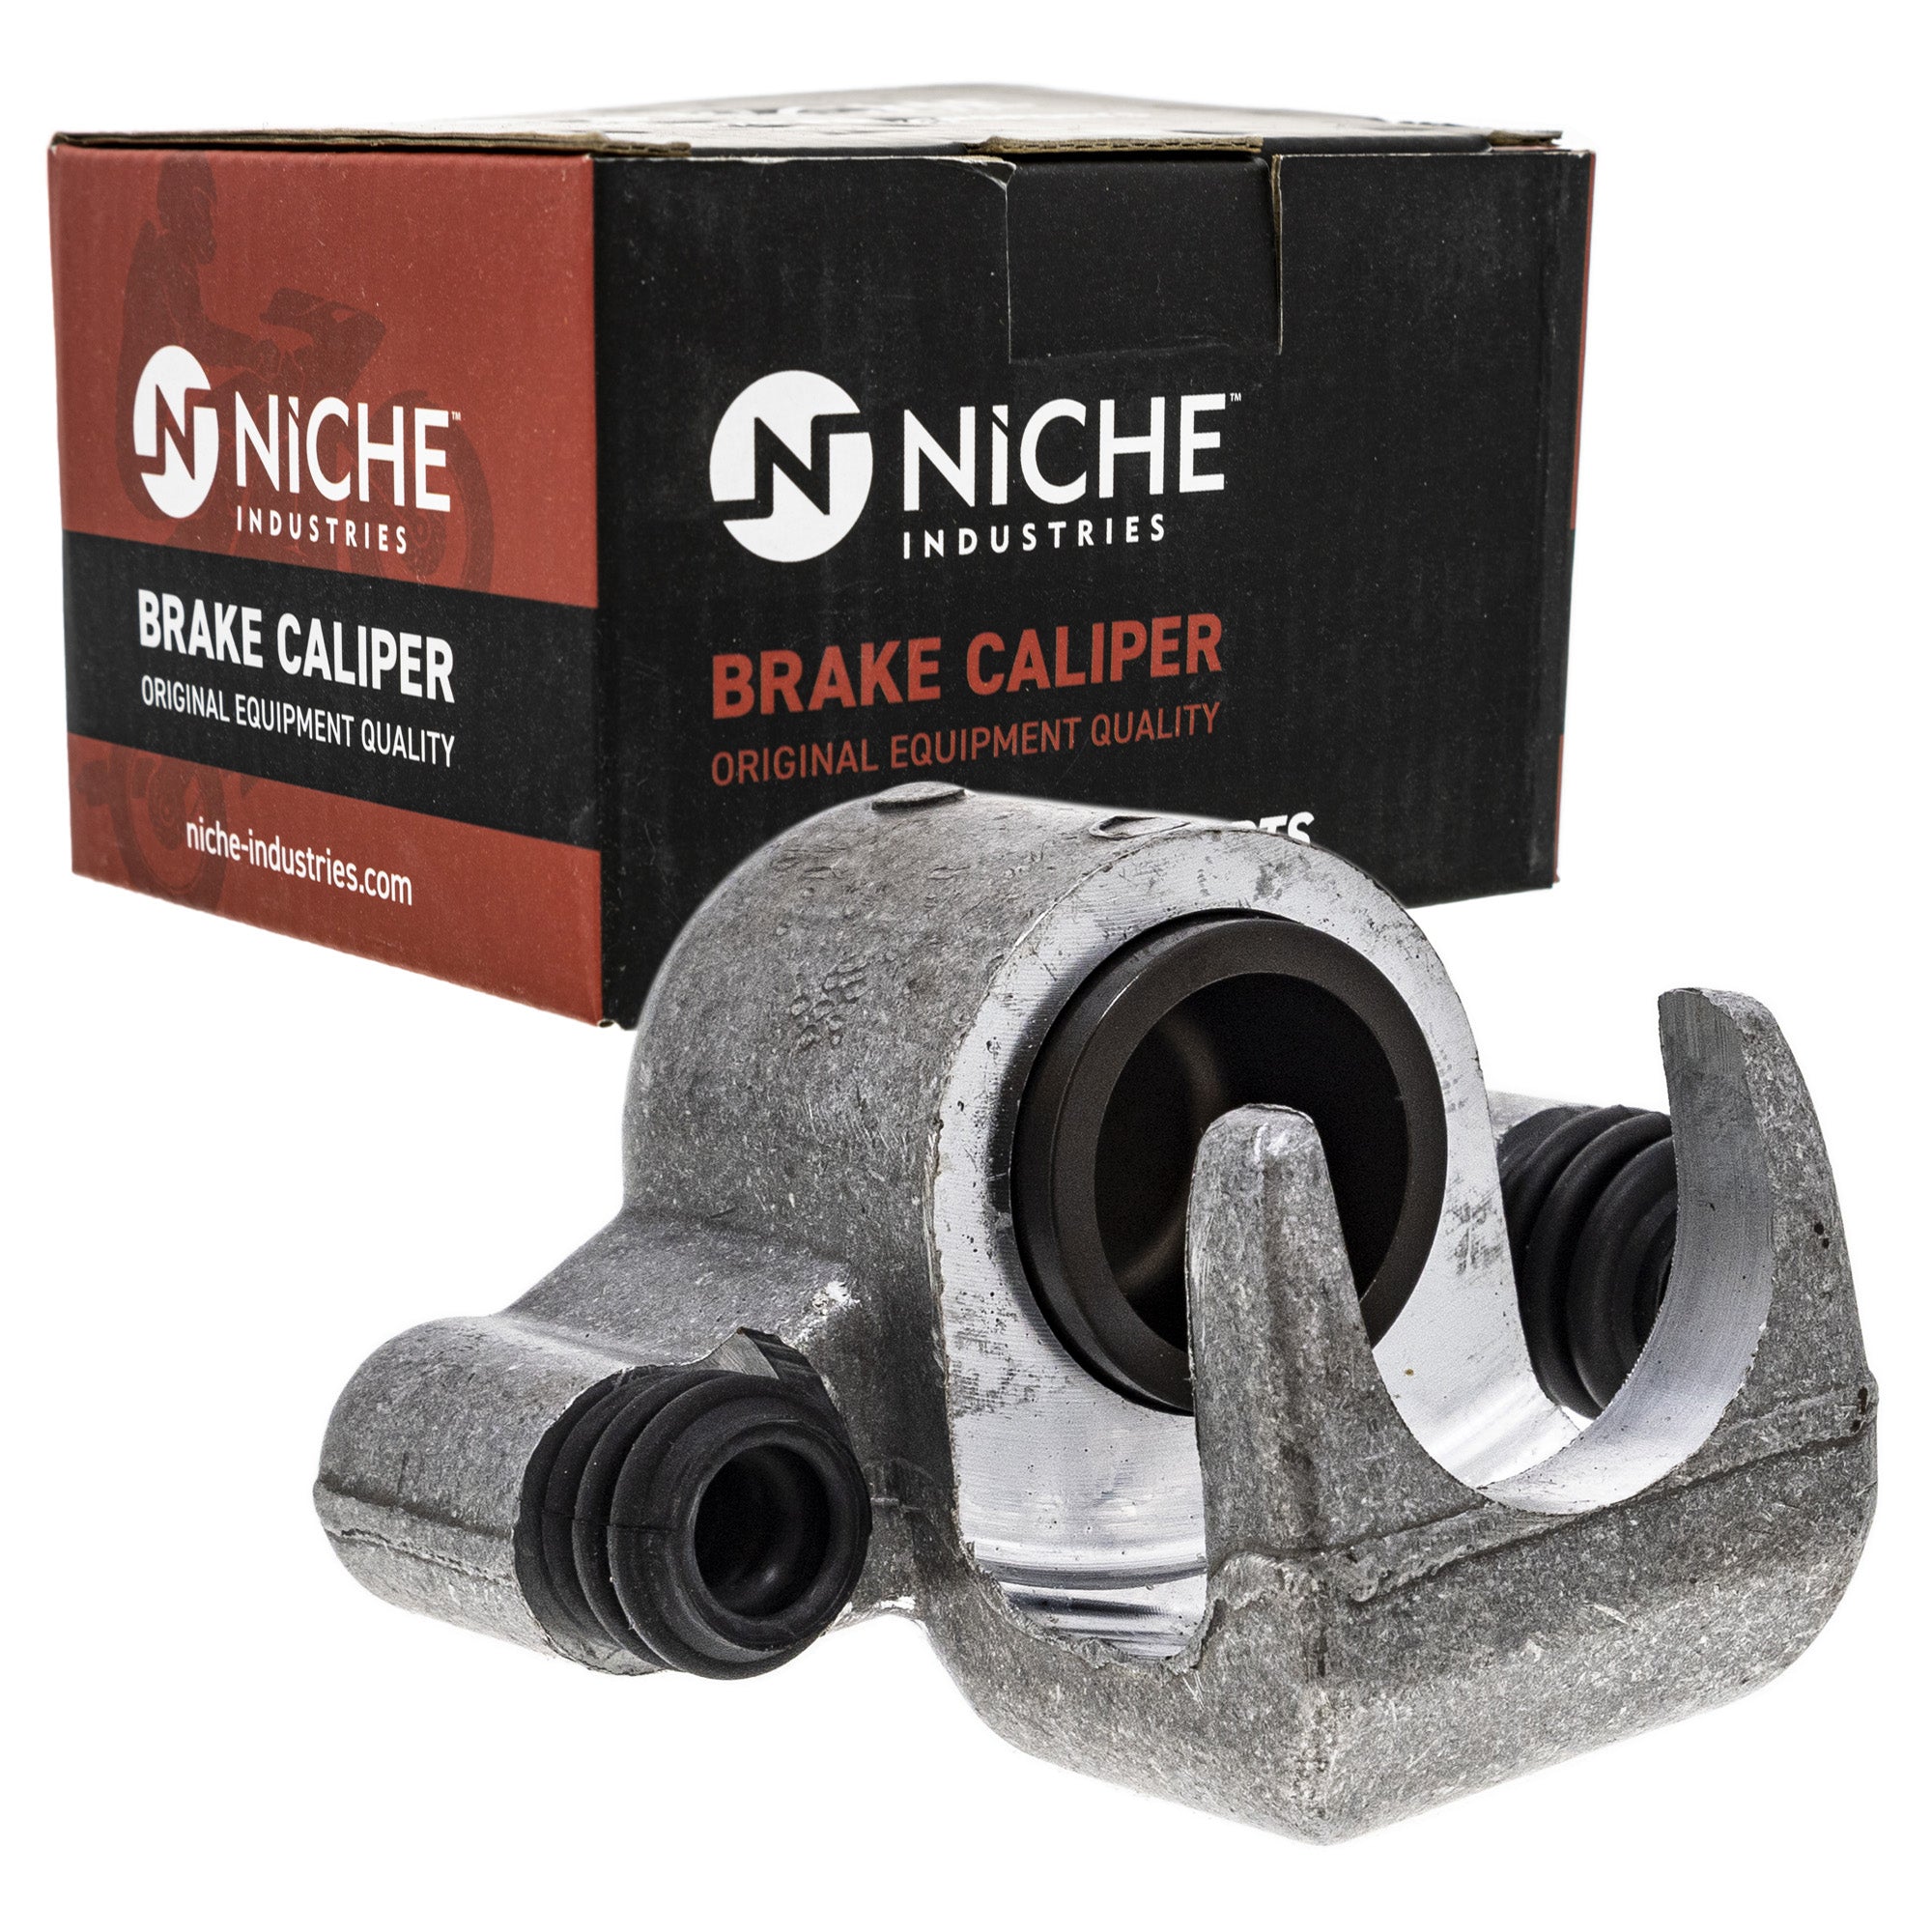 NICHE 519-CCL2234P Brake Caliper Assembly 2-Pack for zOTHER Polaris